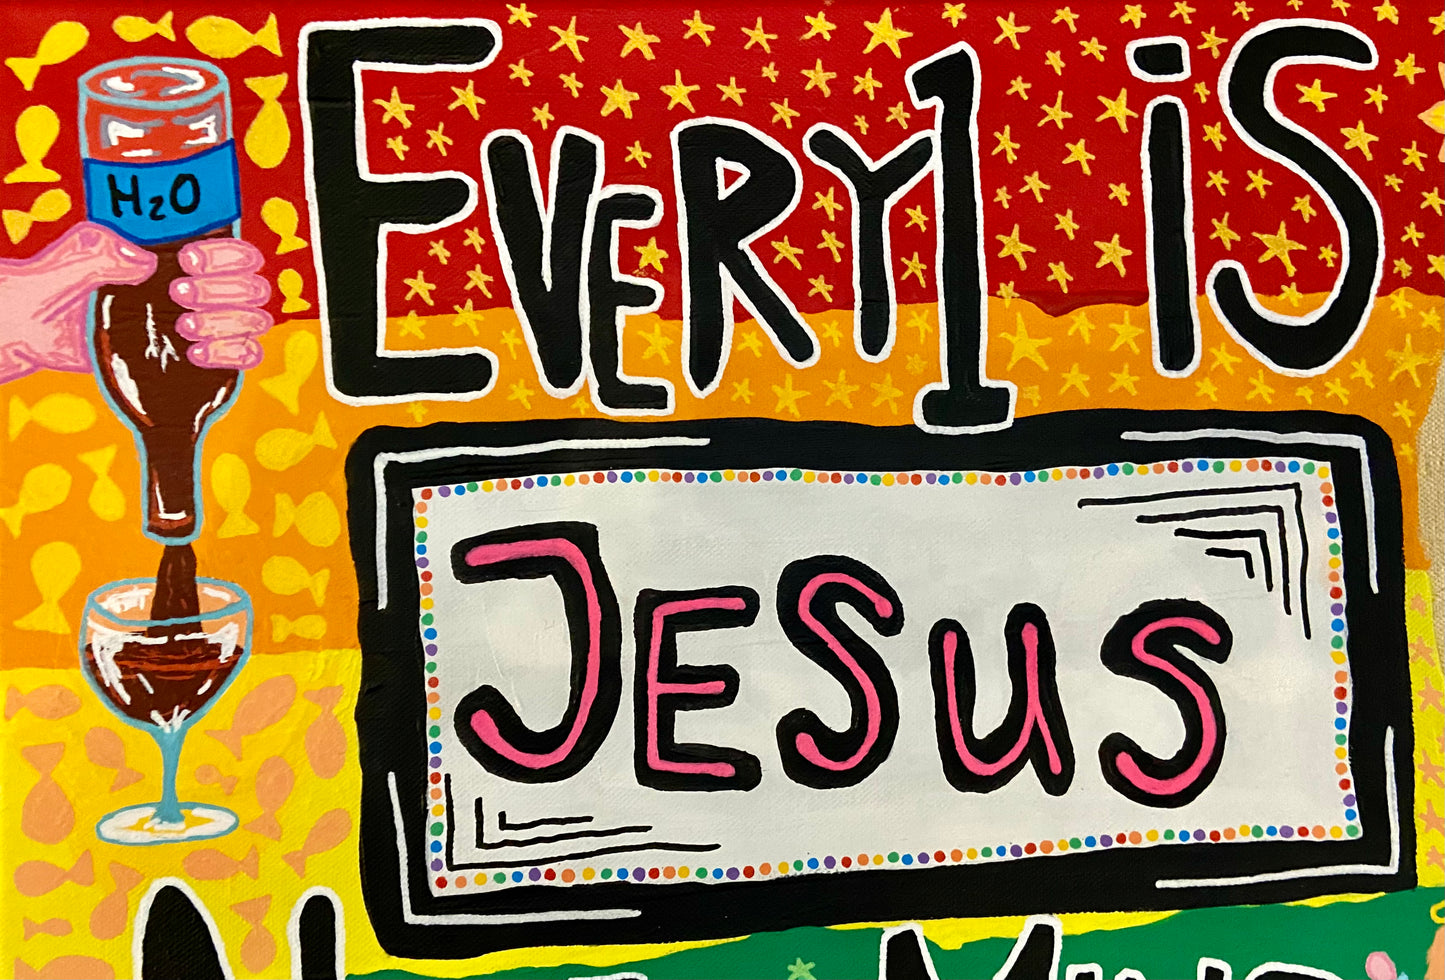 Every 1 is Jesus never mind the bollocks